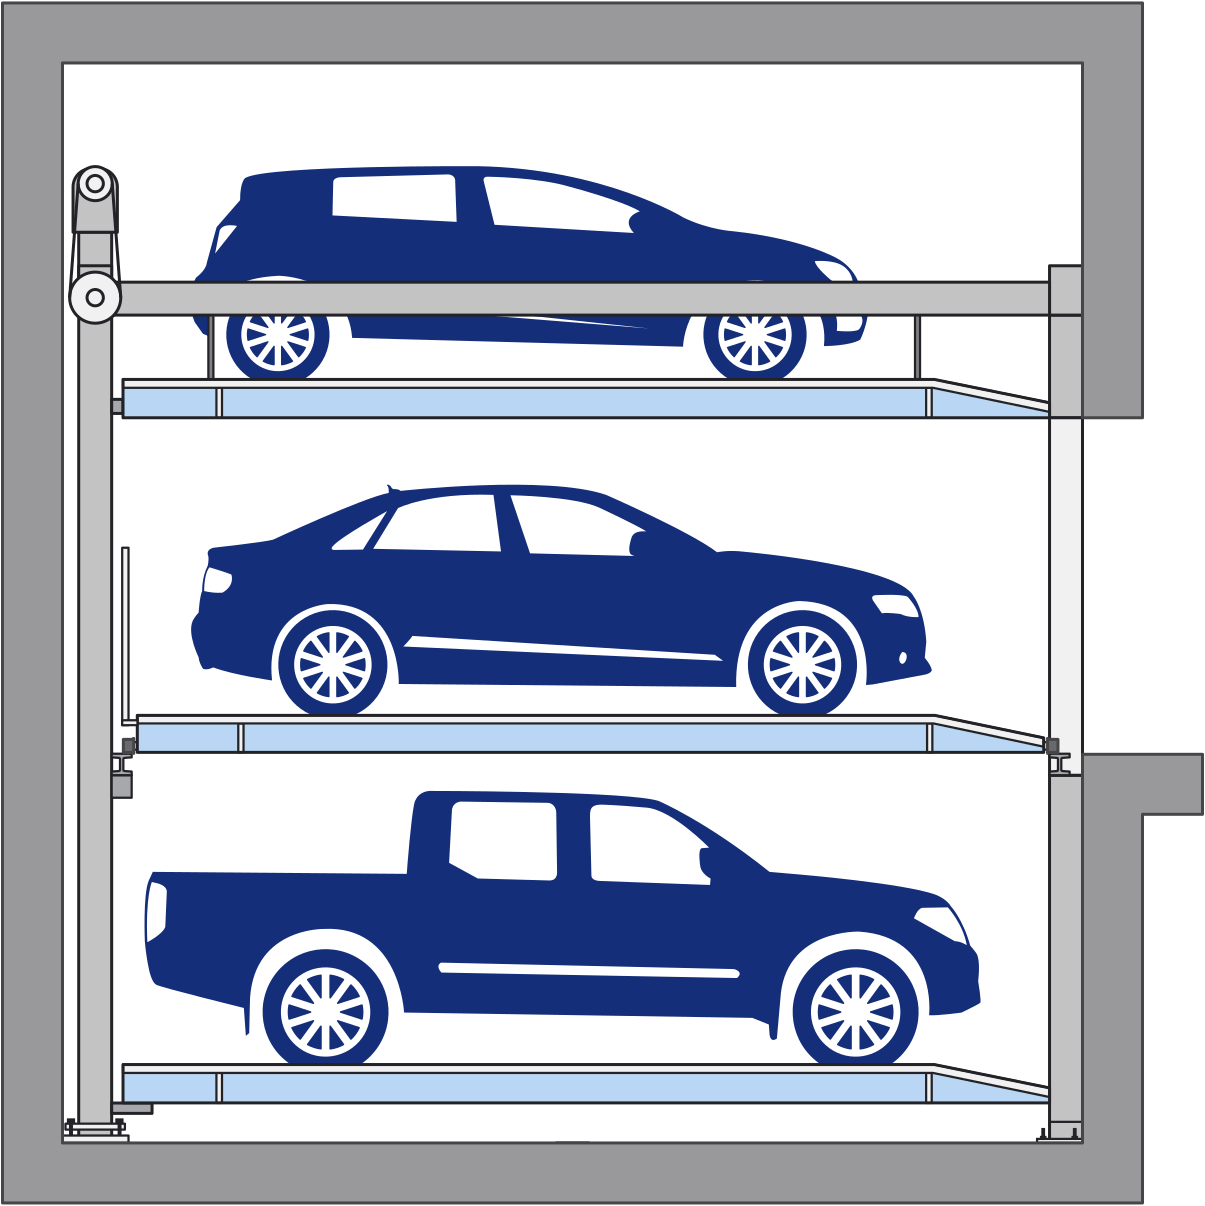 Diagram of a semi automatic car stacker with navy blue vehicles